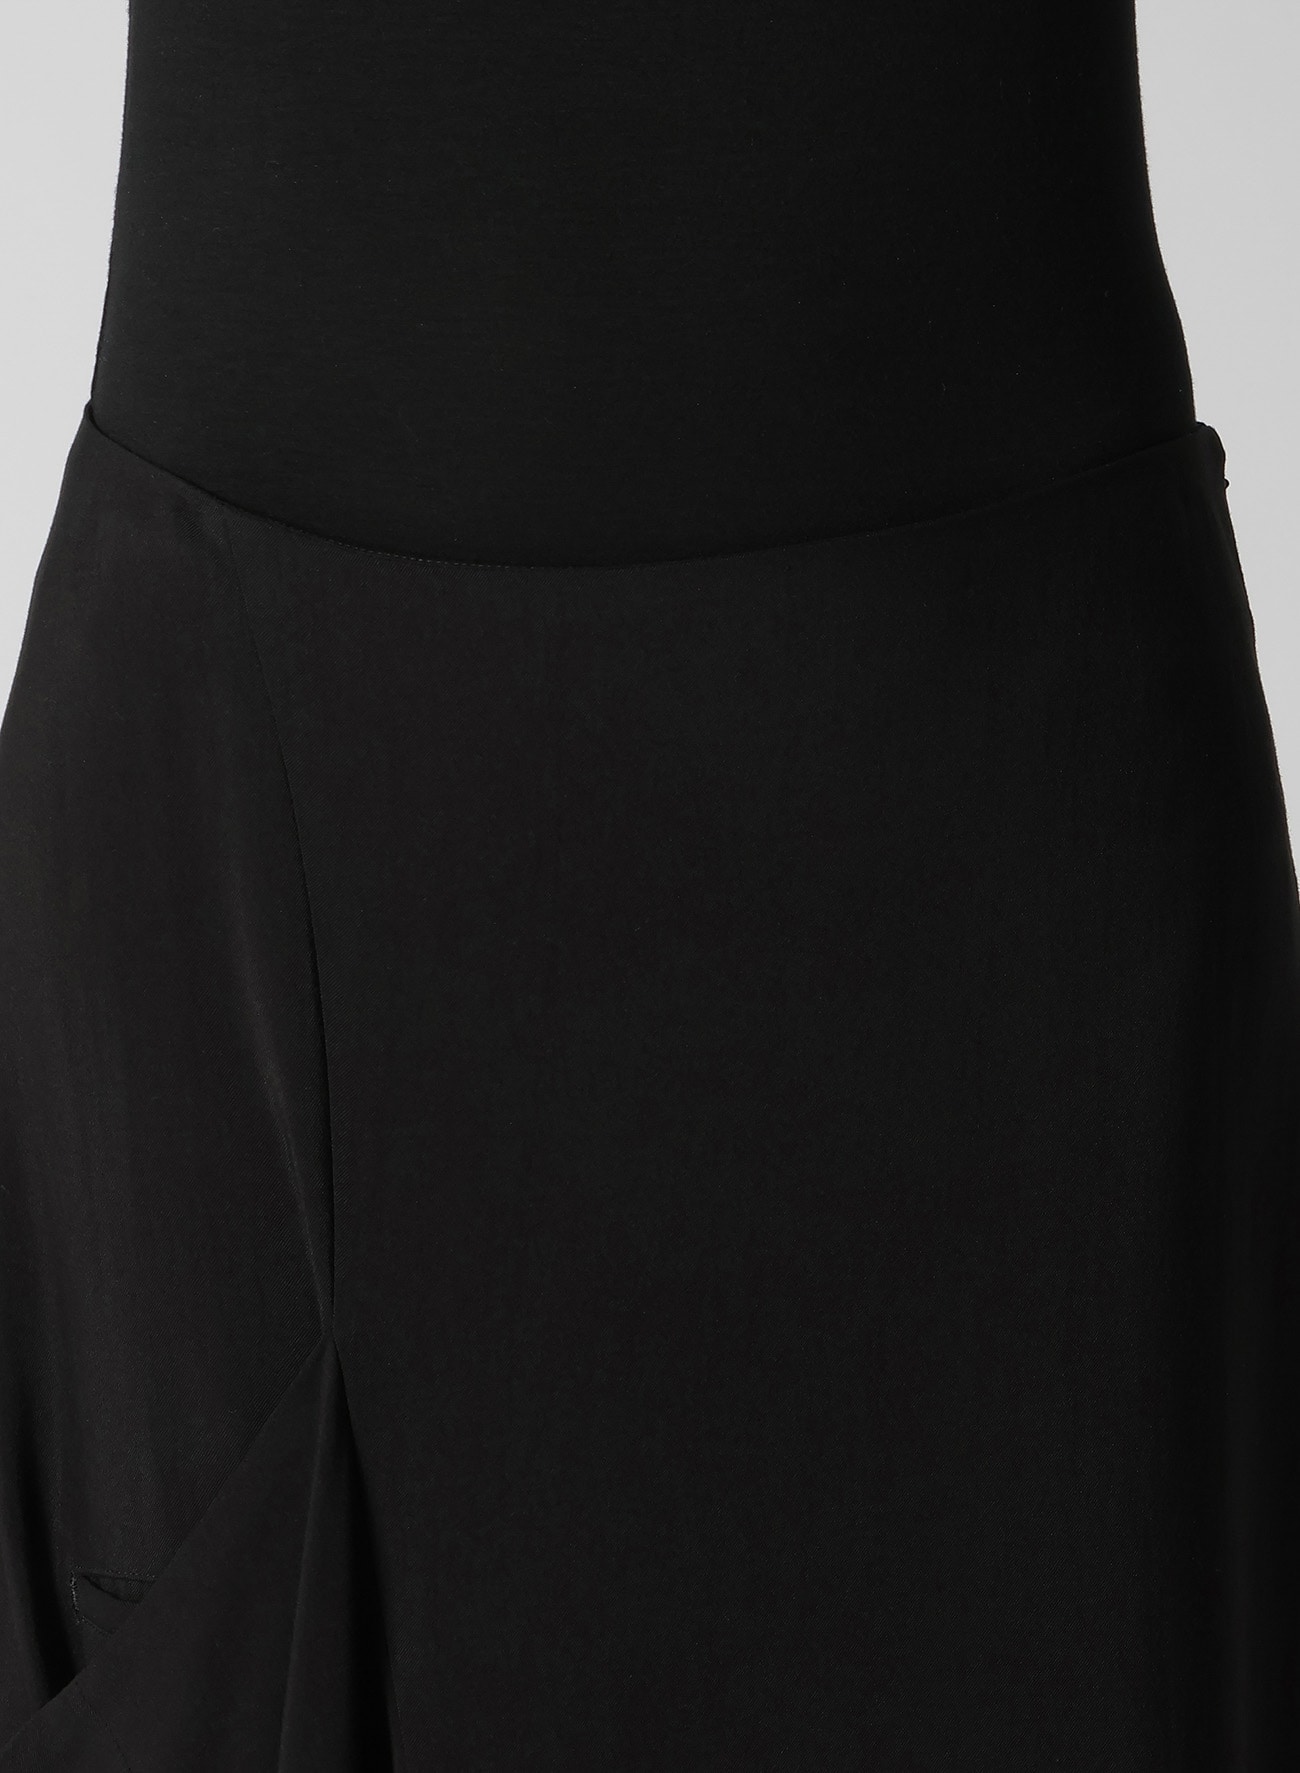 RAYON CUPRO RIGHT SIDE MARMAID FLARE SKIRT